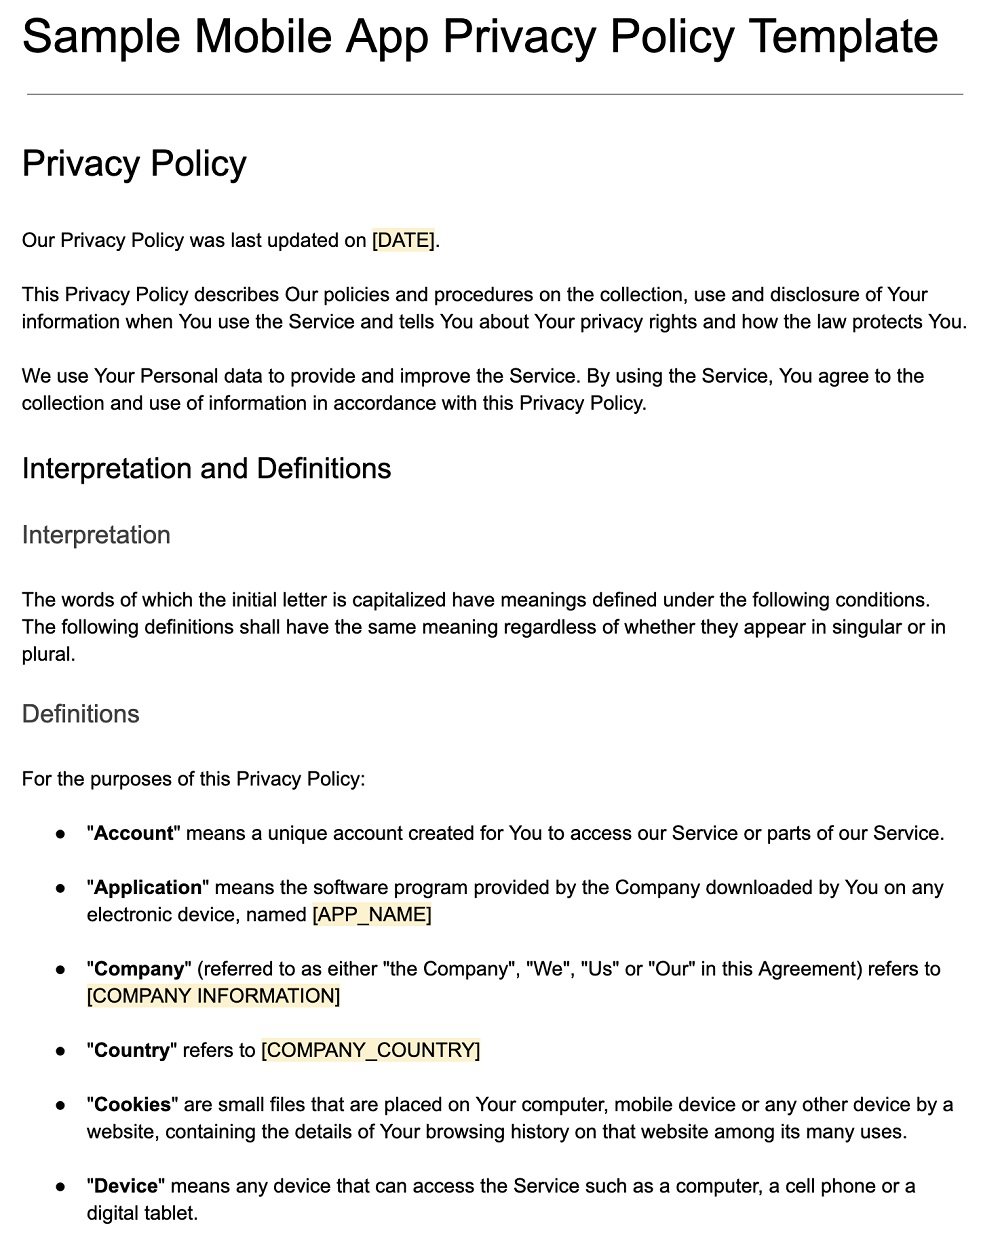 Mobile App Privacy Policy Template